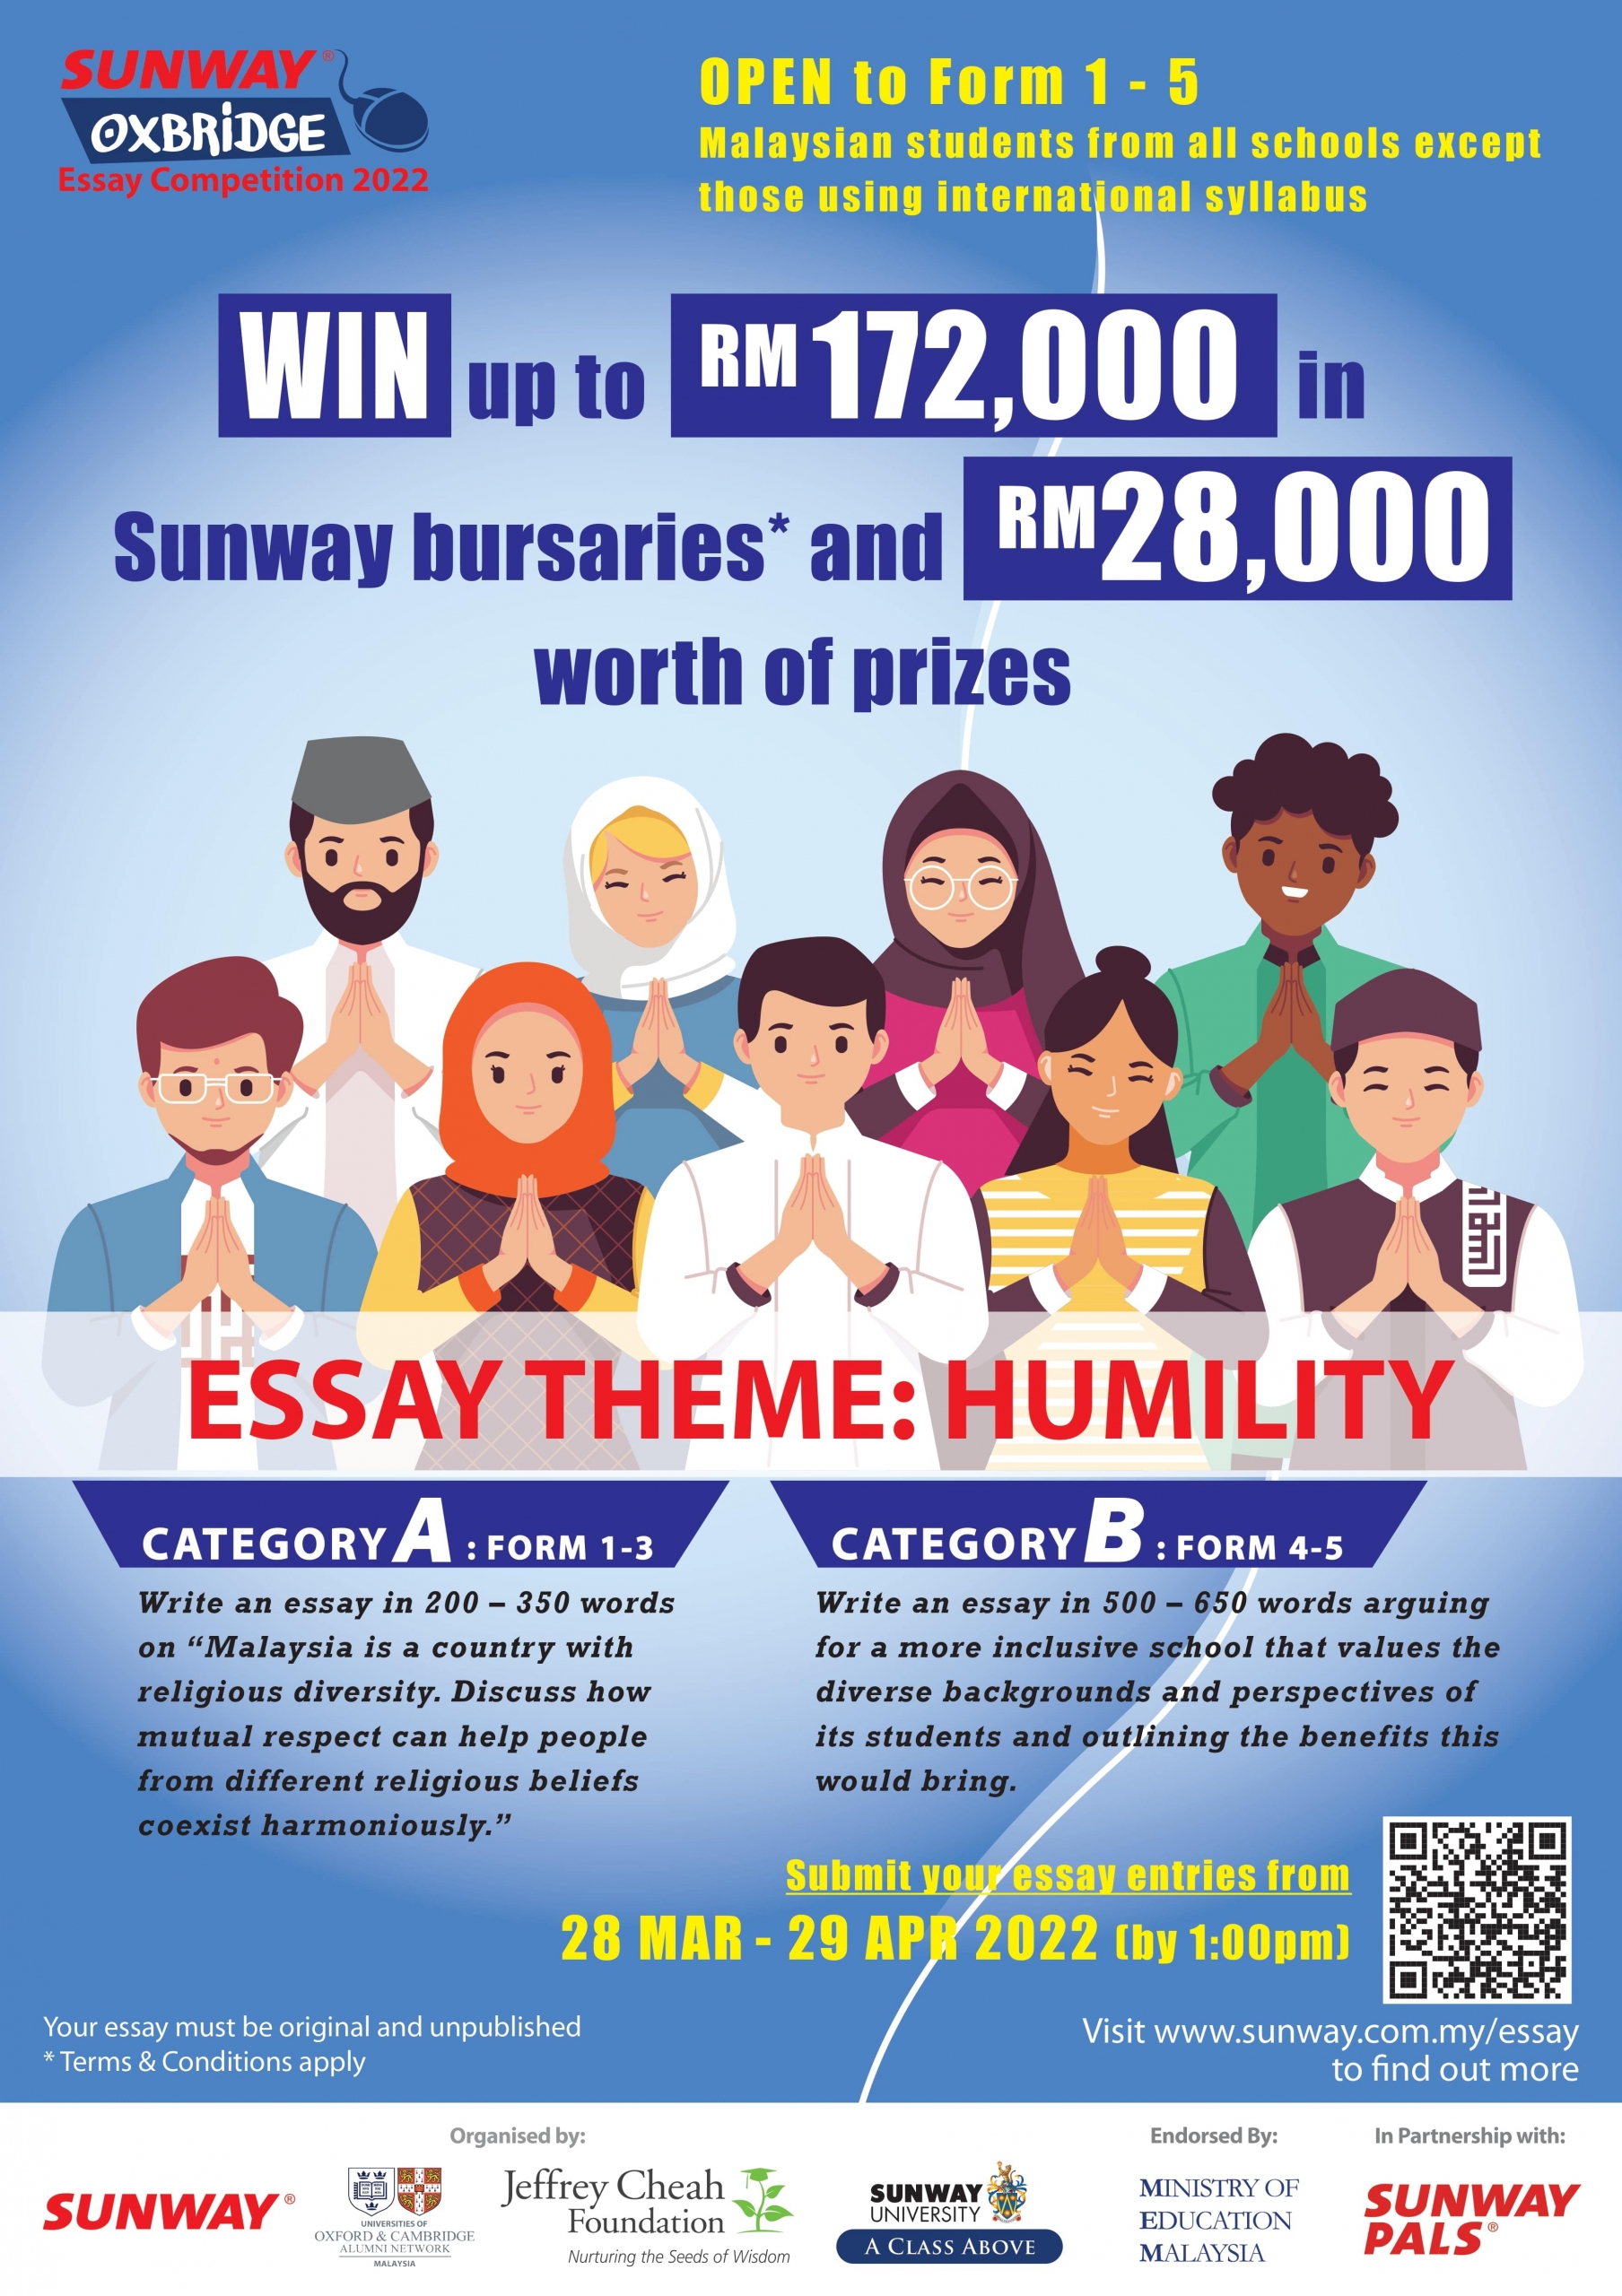 The Sunway-Oxbridge Competition 2022 poster in full view, bearing the theme “Humility”